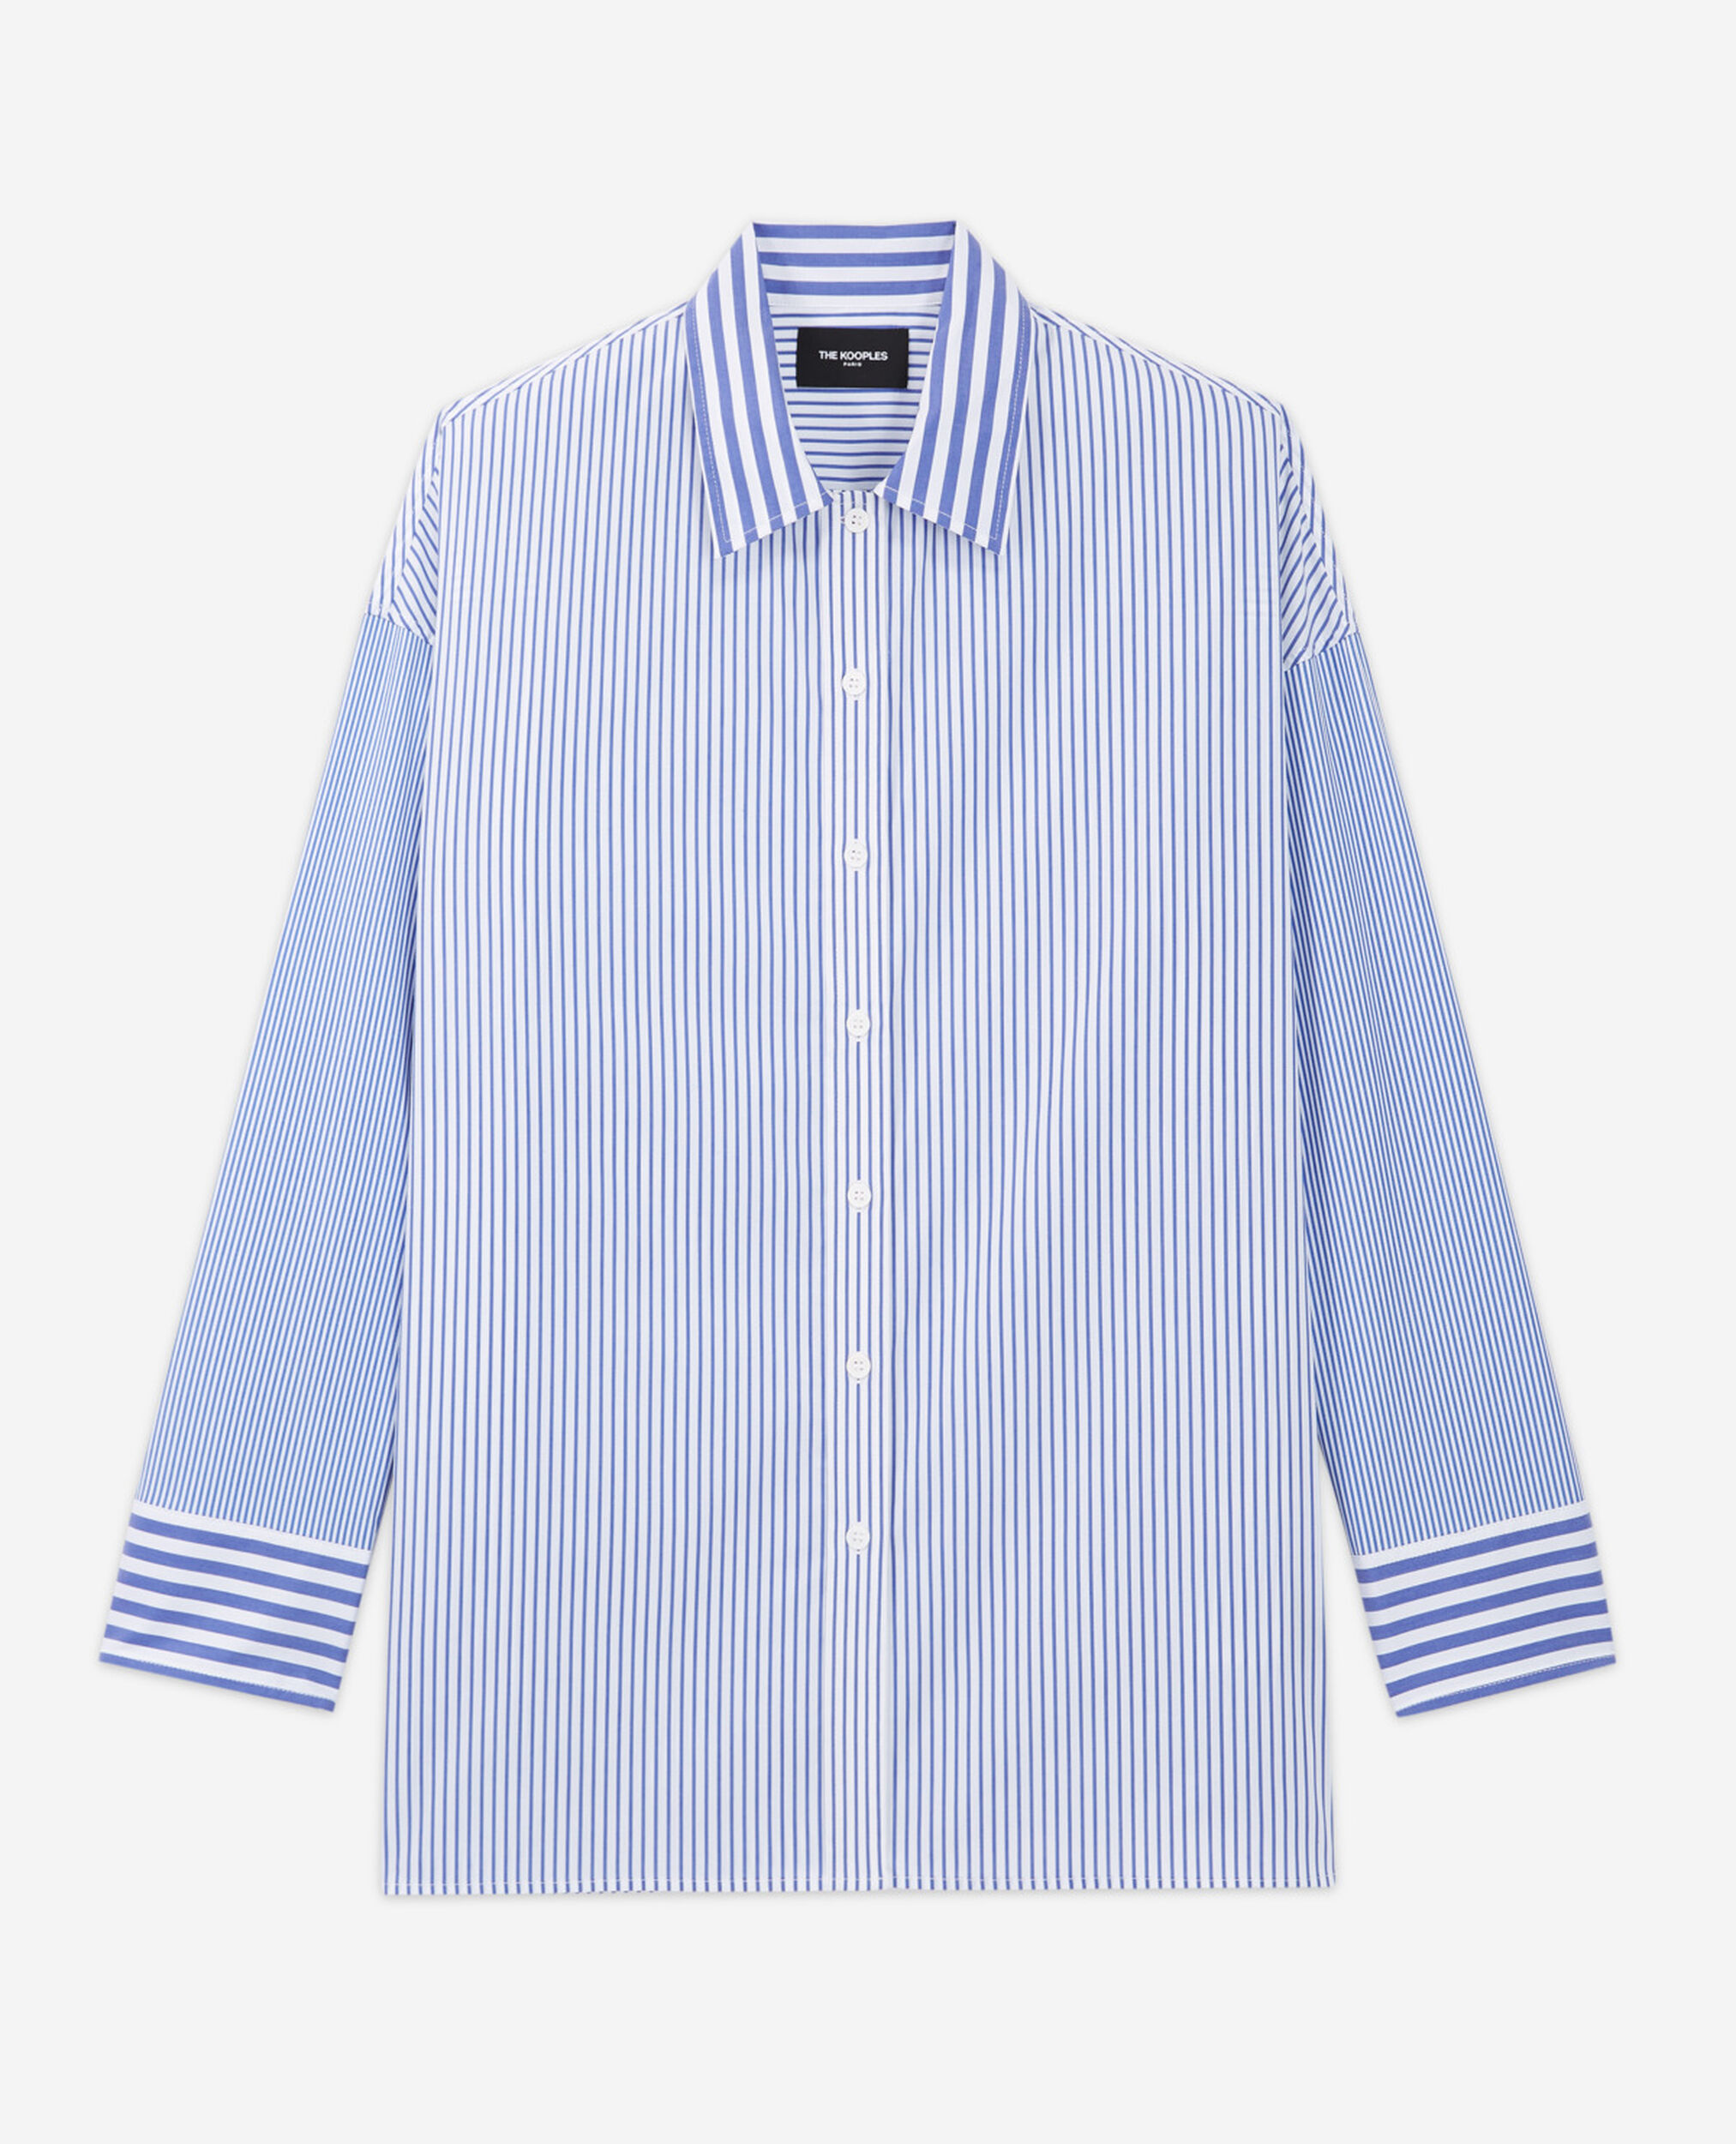 Straight-fit striped formal blue shirt, BLUE WHITE, hi-res image number null